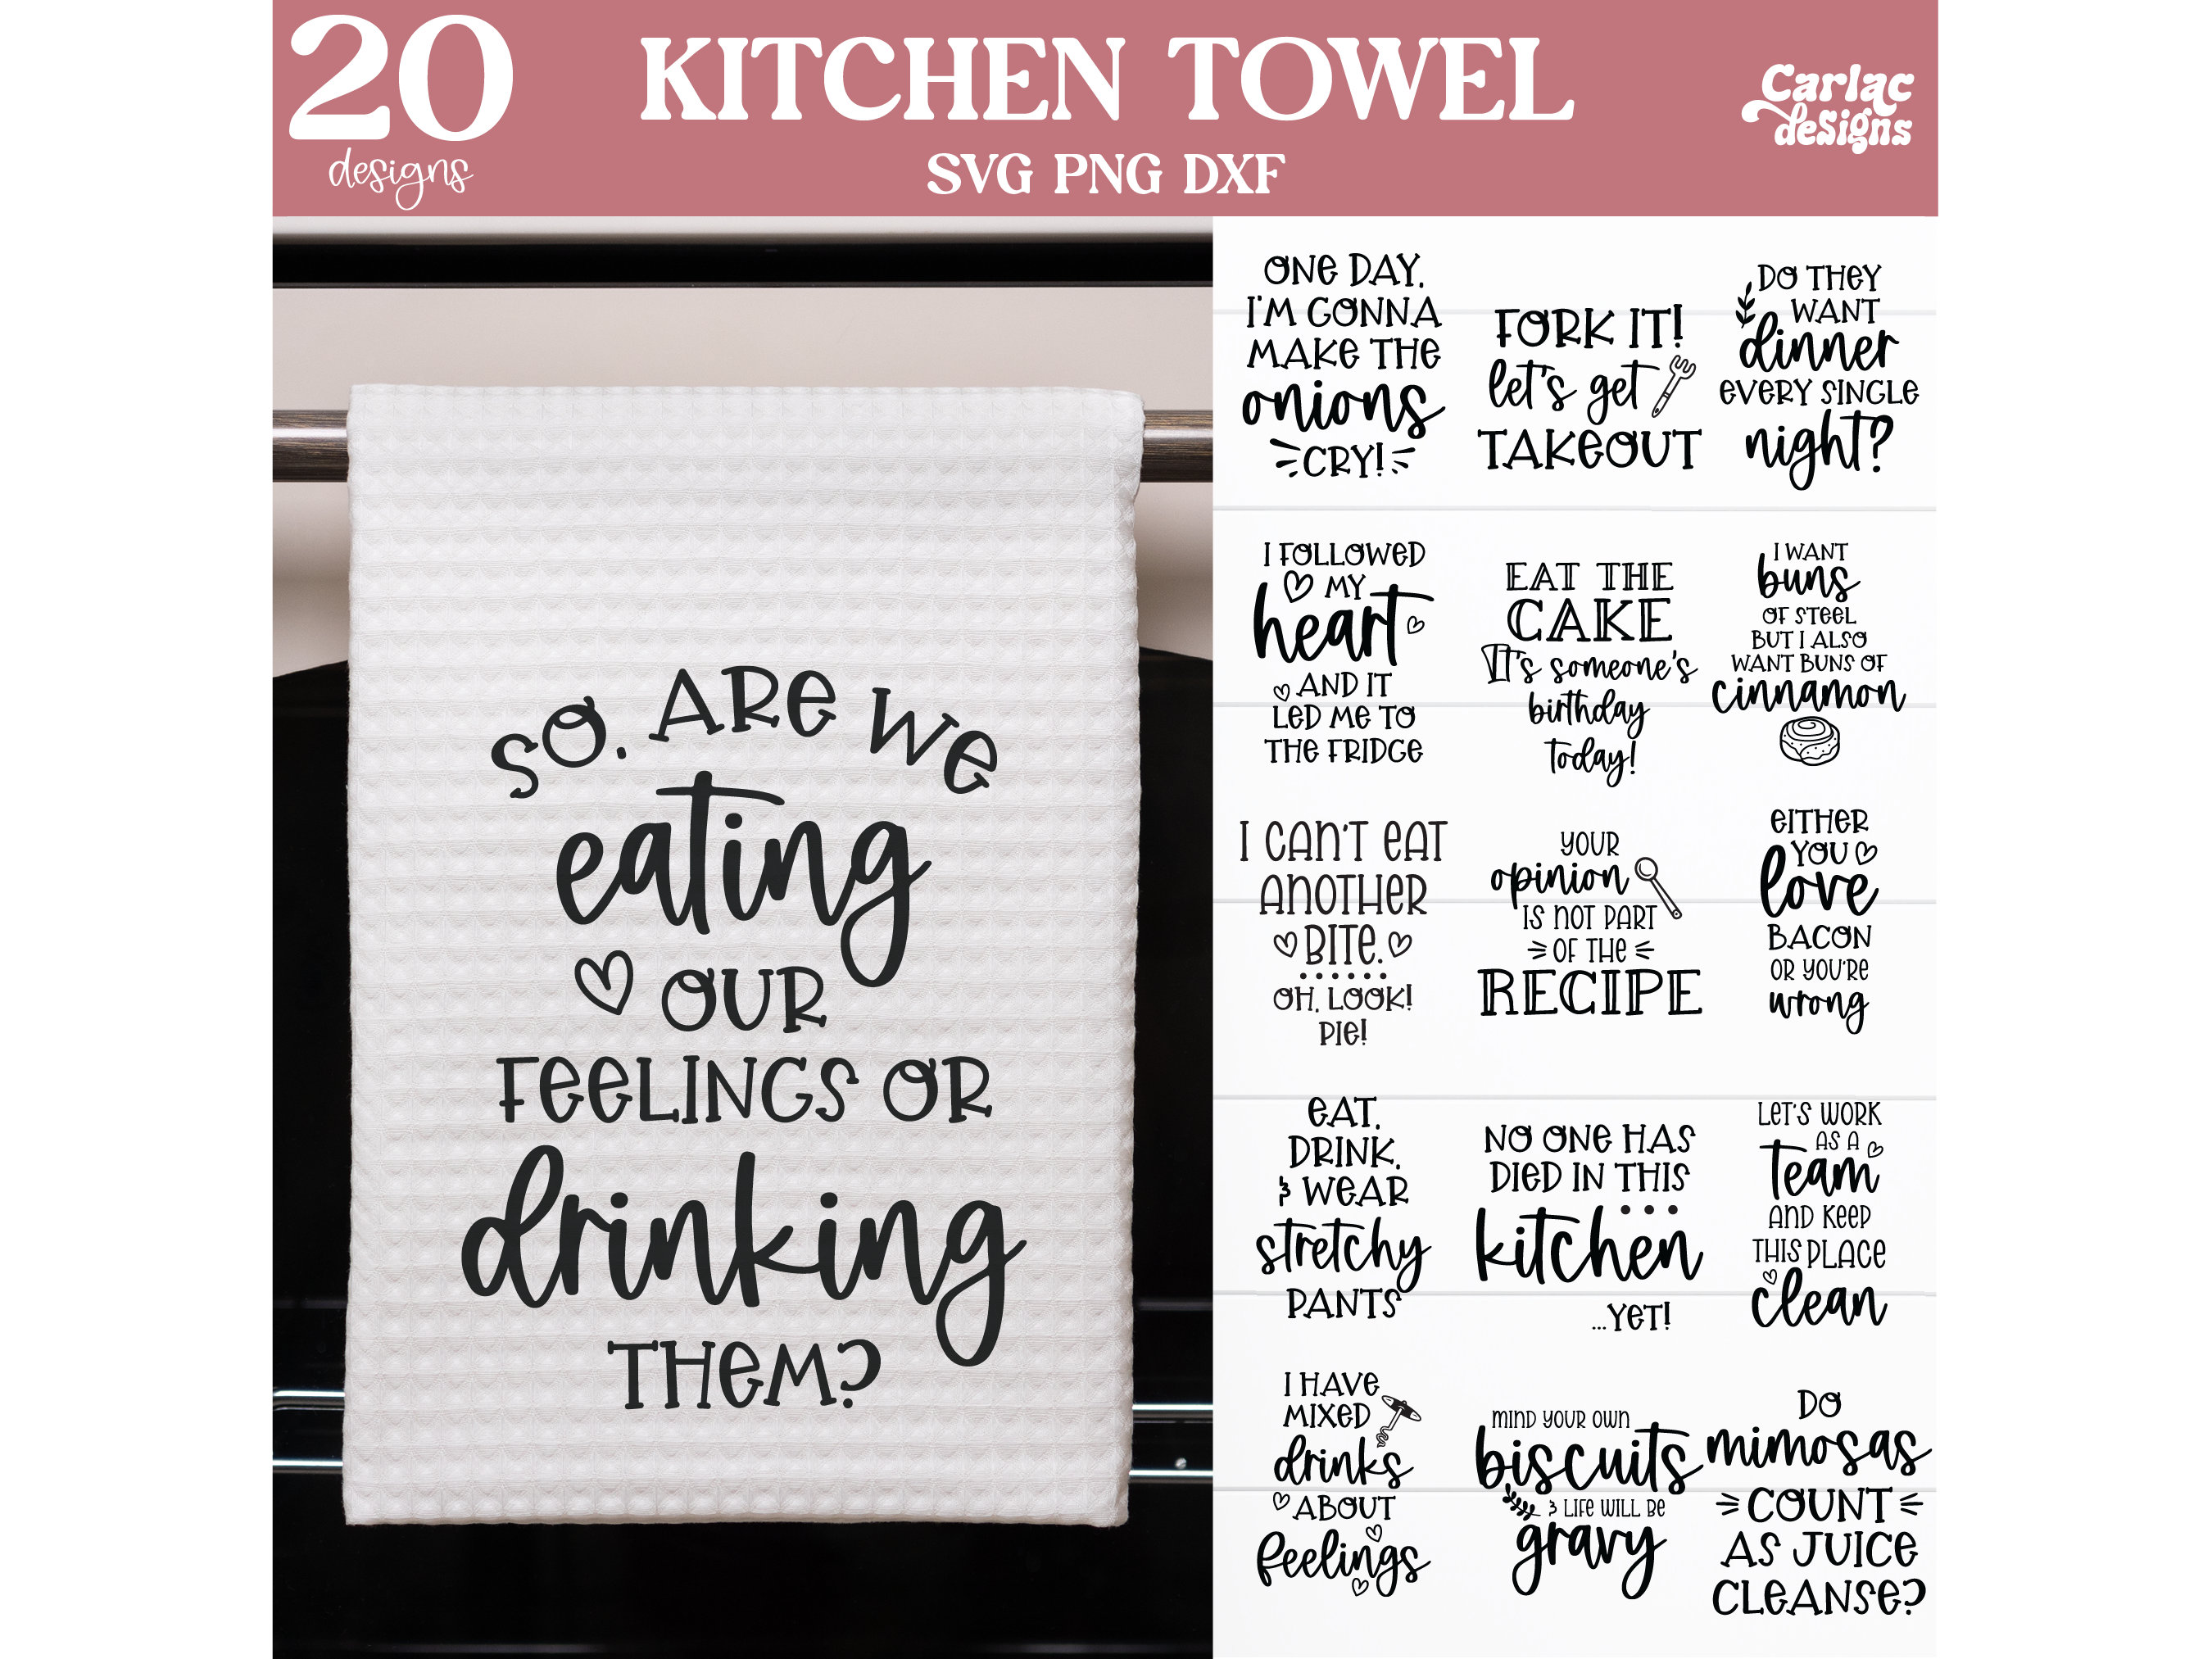  Vastsea Funny Kitchen Towels Set-Funny Flour Sack Dish Towels  Decorative Set with Saying,Tea Towels,Funny Hand Towels Set of 4,New Home  Gifts,Housewarming Gift for Women Hostess,White : Home & Kitchen